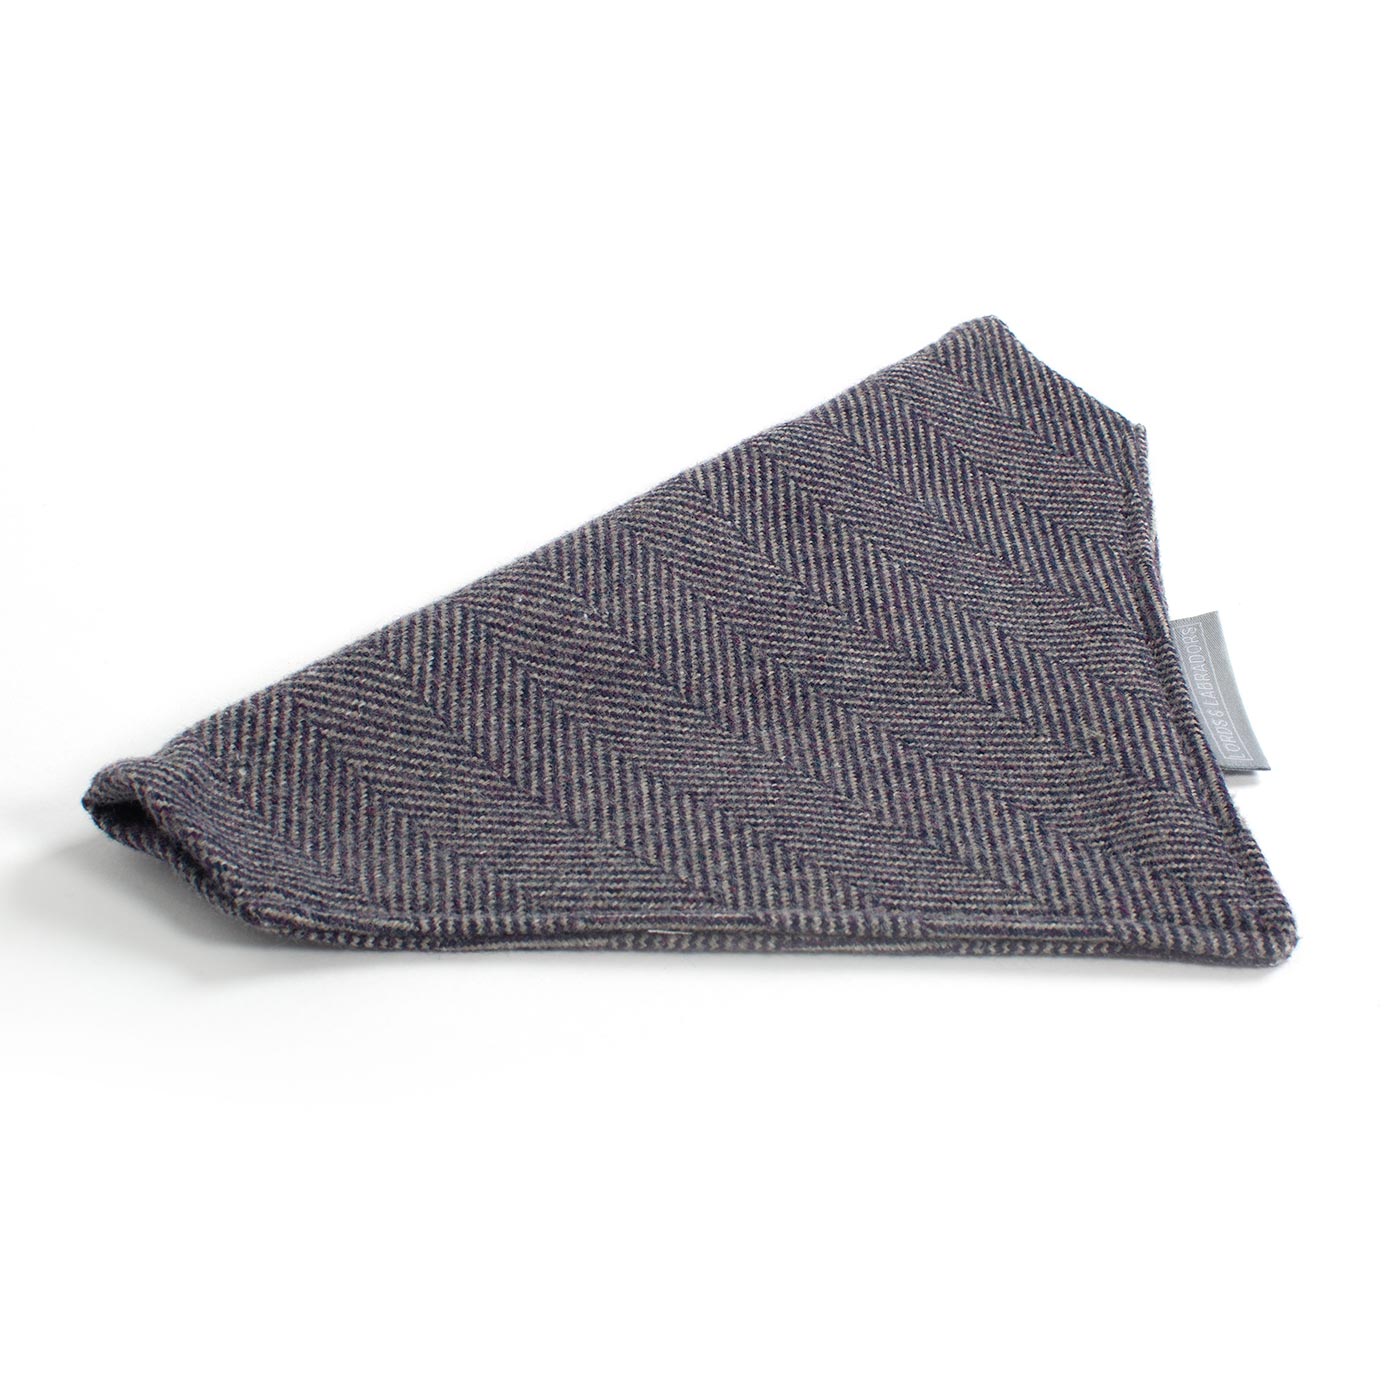 Discover The Perfect Bandana For Dogs, Handmade With love In Luxury Herringbone Tweed, Available In 3 Sizes To Personalise Now at Lords & Labradors 